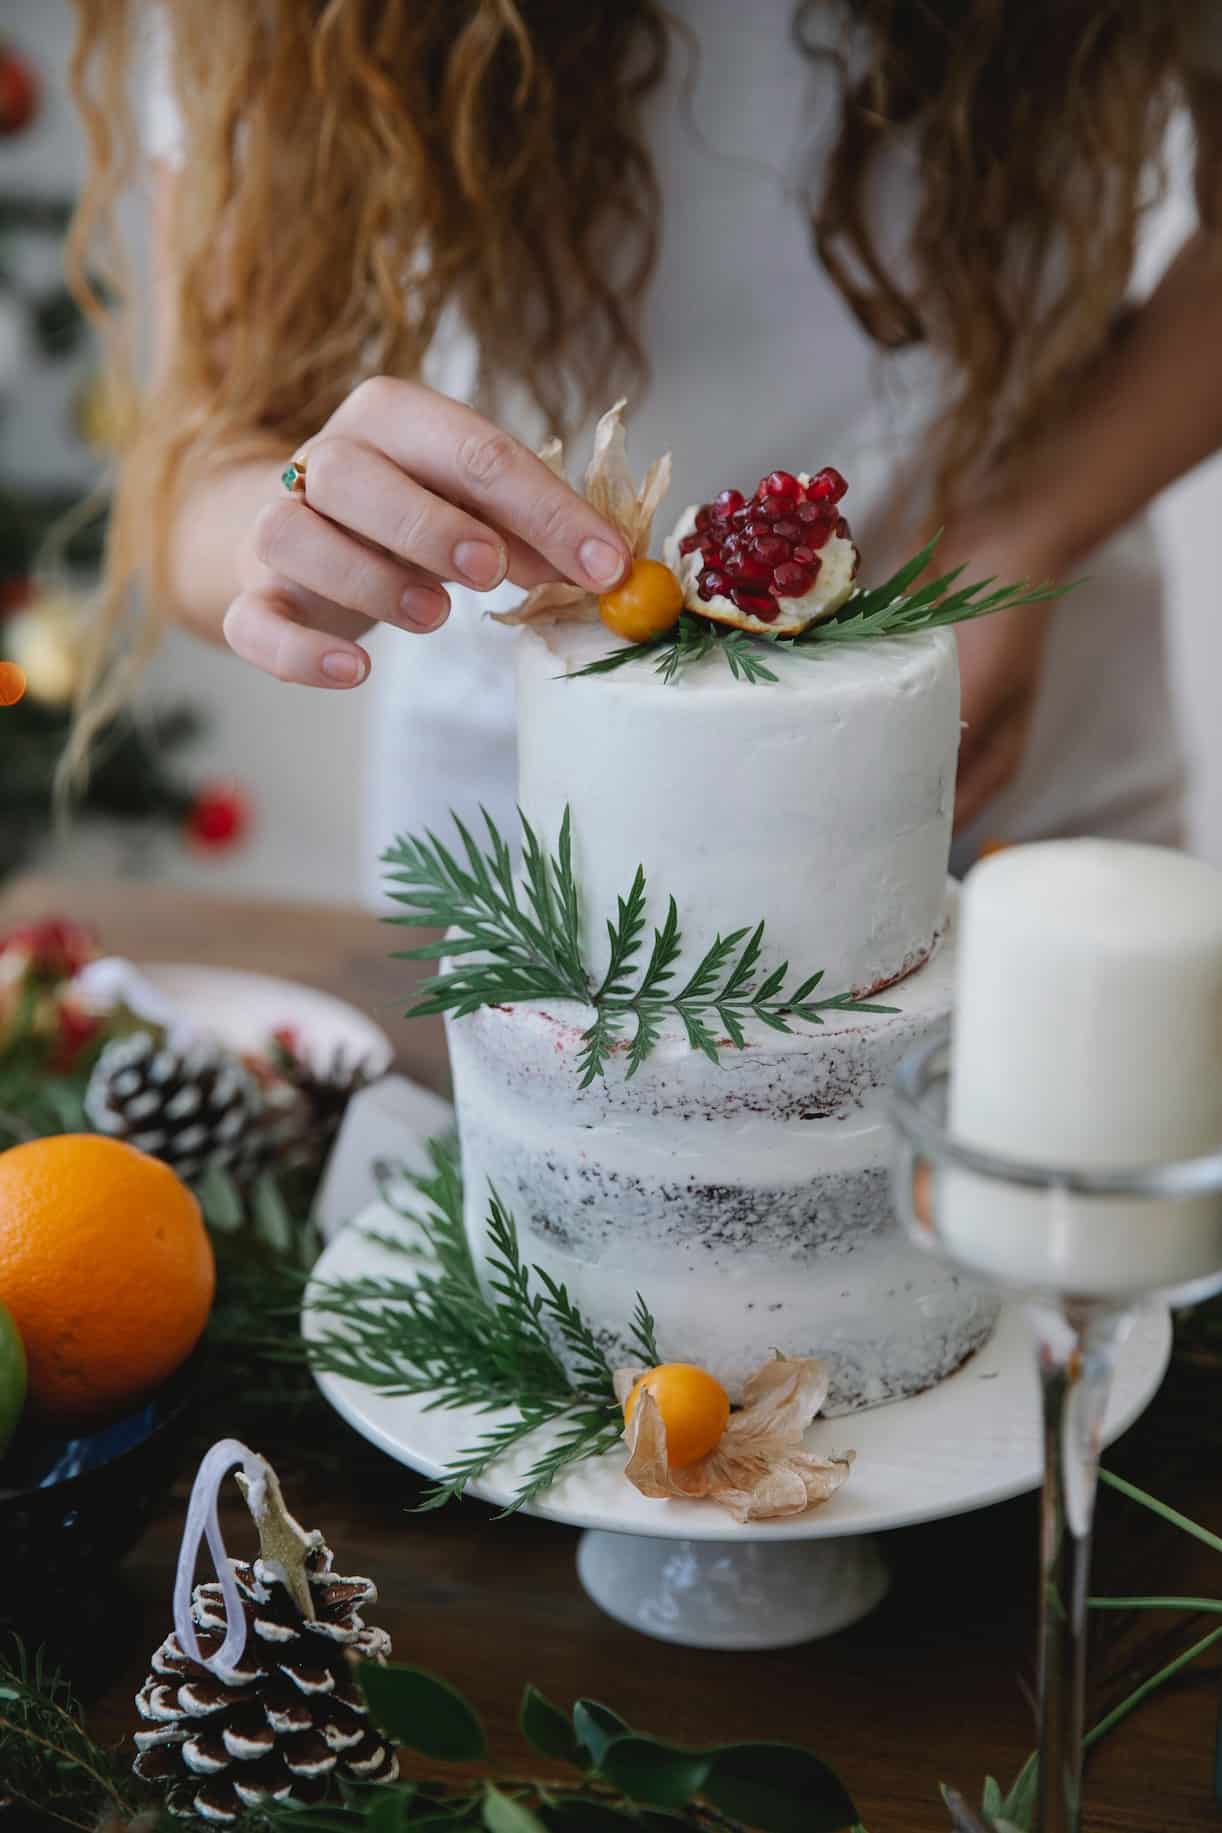 Christmas Cake with Colorful Elements